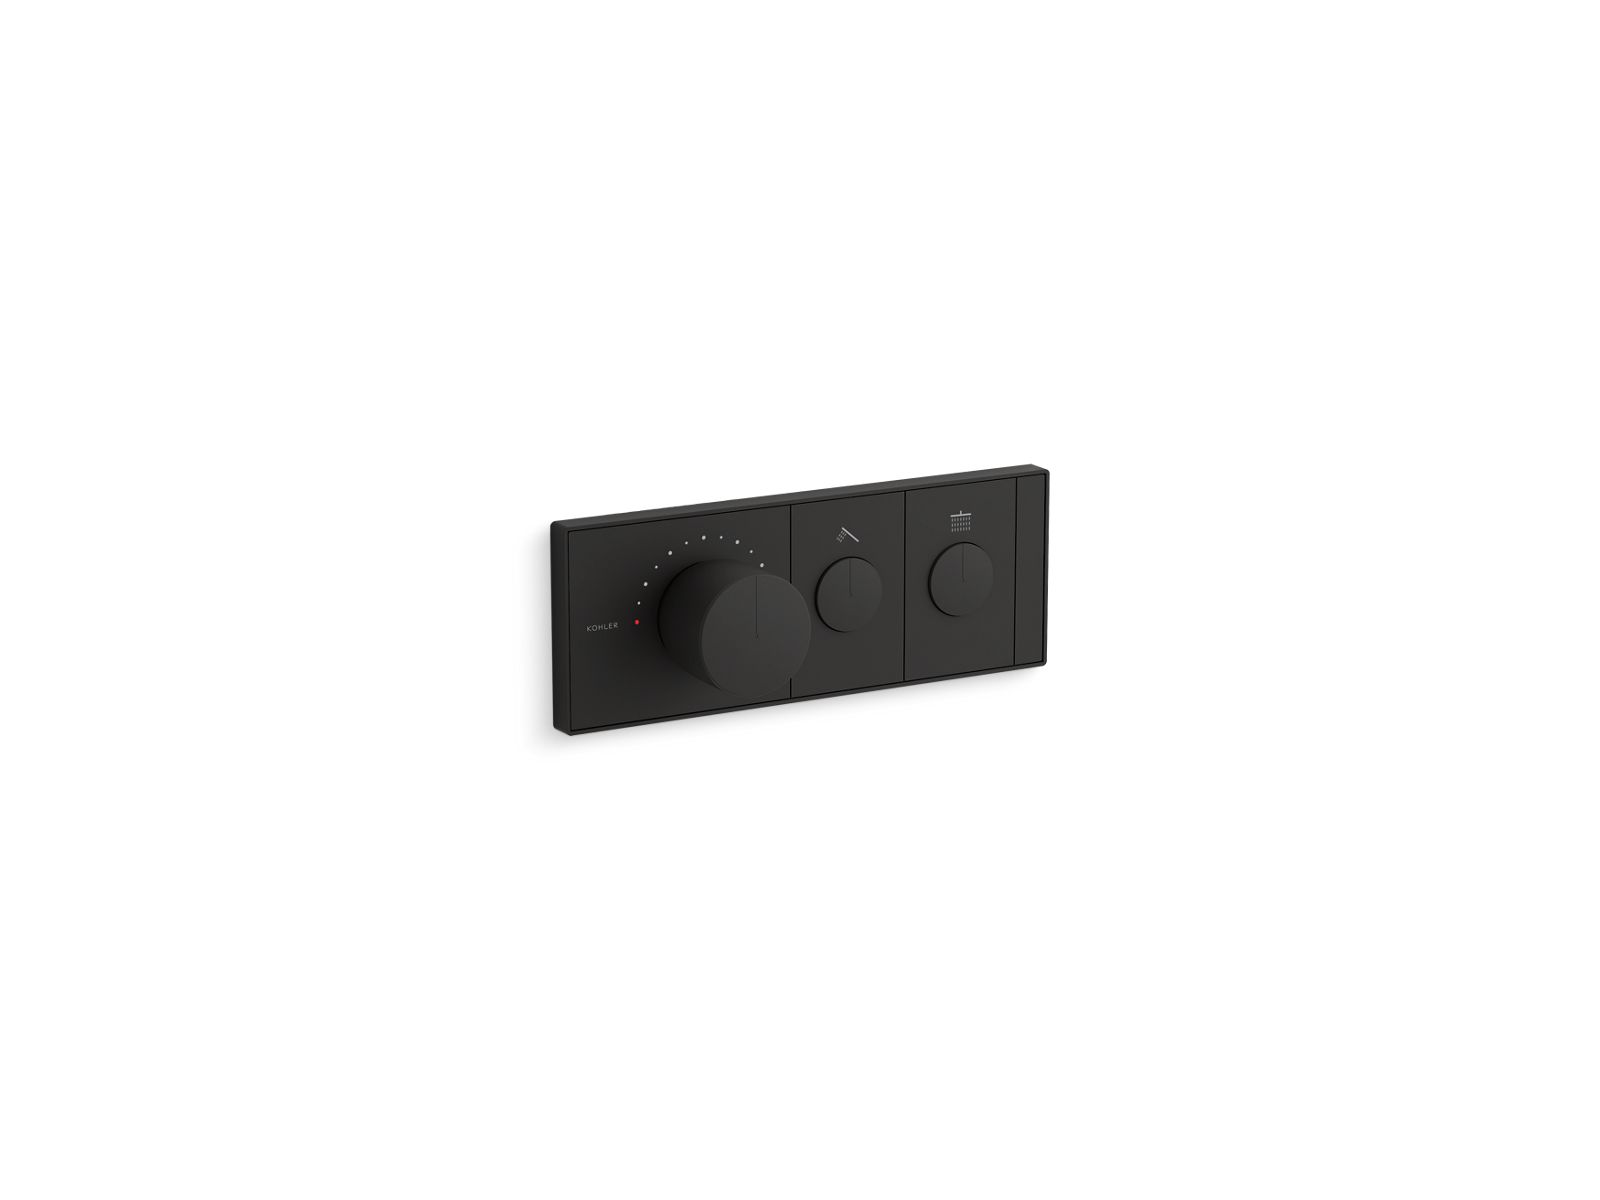 KOHLER K-26346-9 Anthem Two-outlet thermostatic valve control panel with recessed push buttons